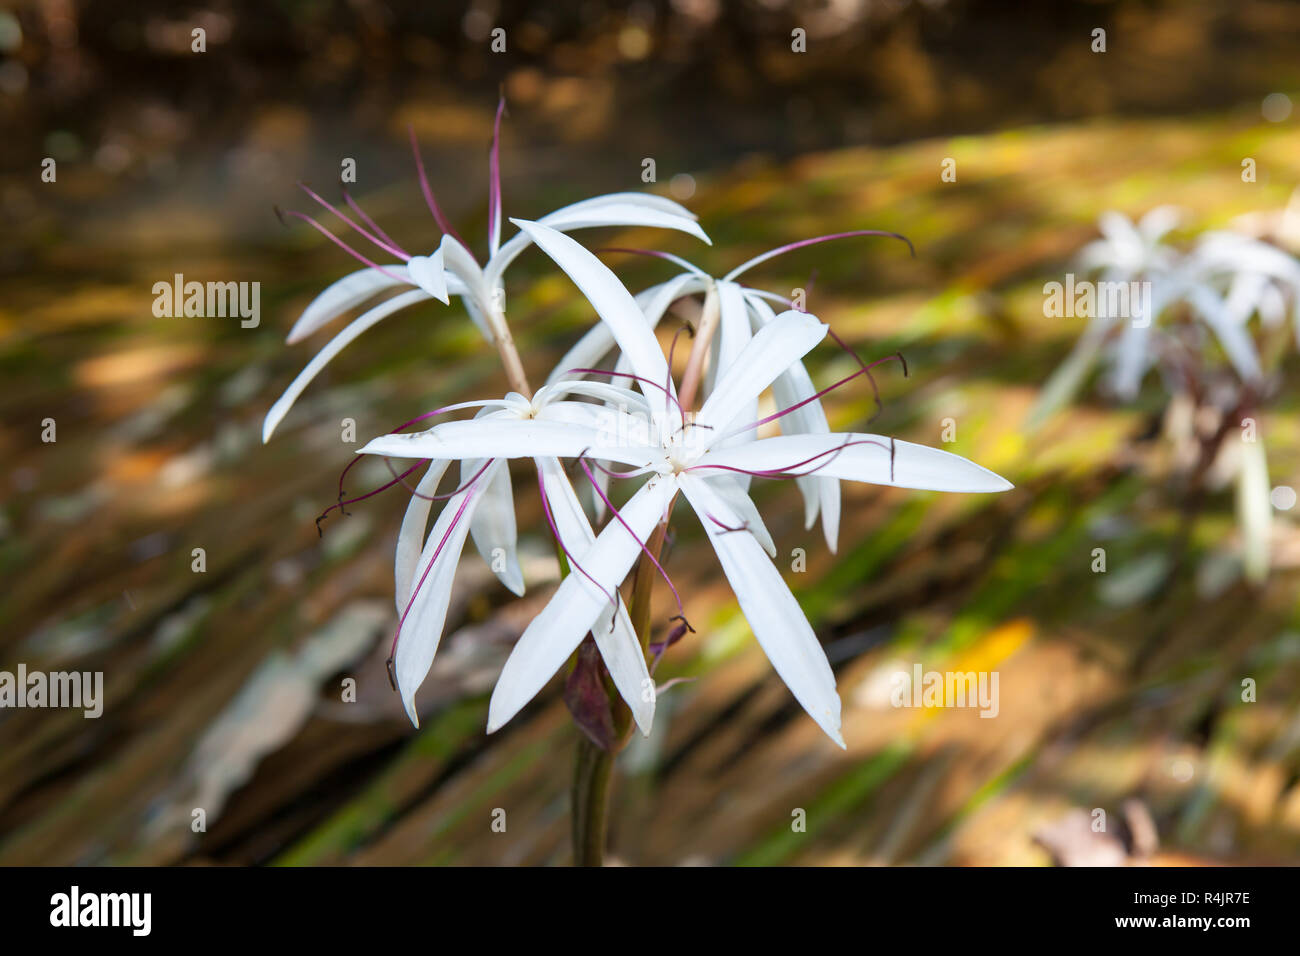 Rare Crinum thaianum or water lily or Water onion Stock Photo